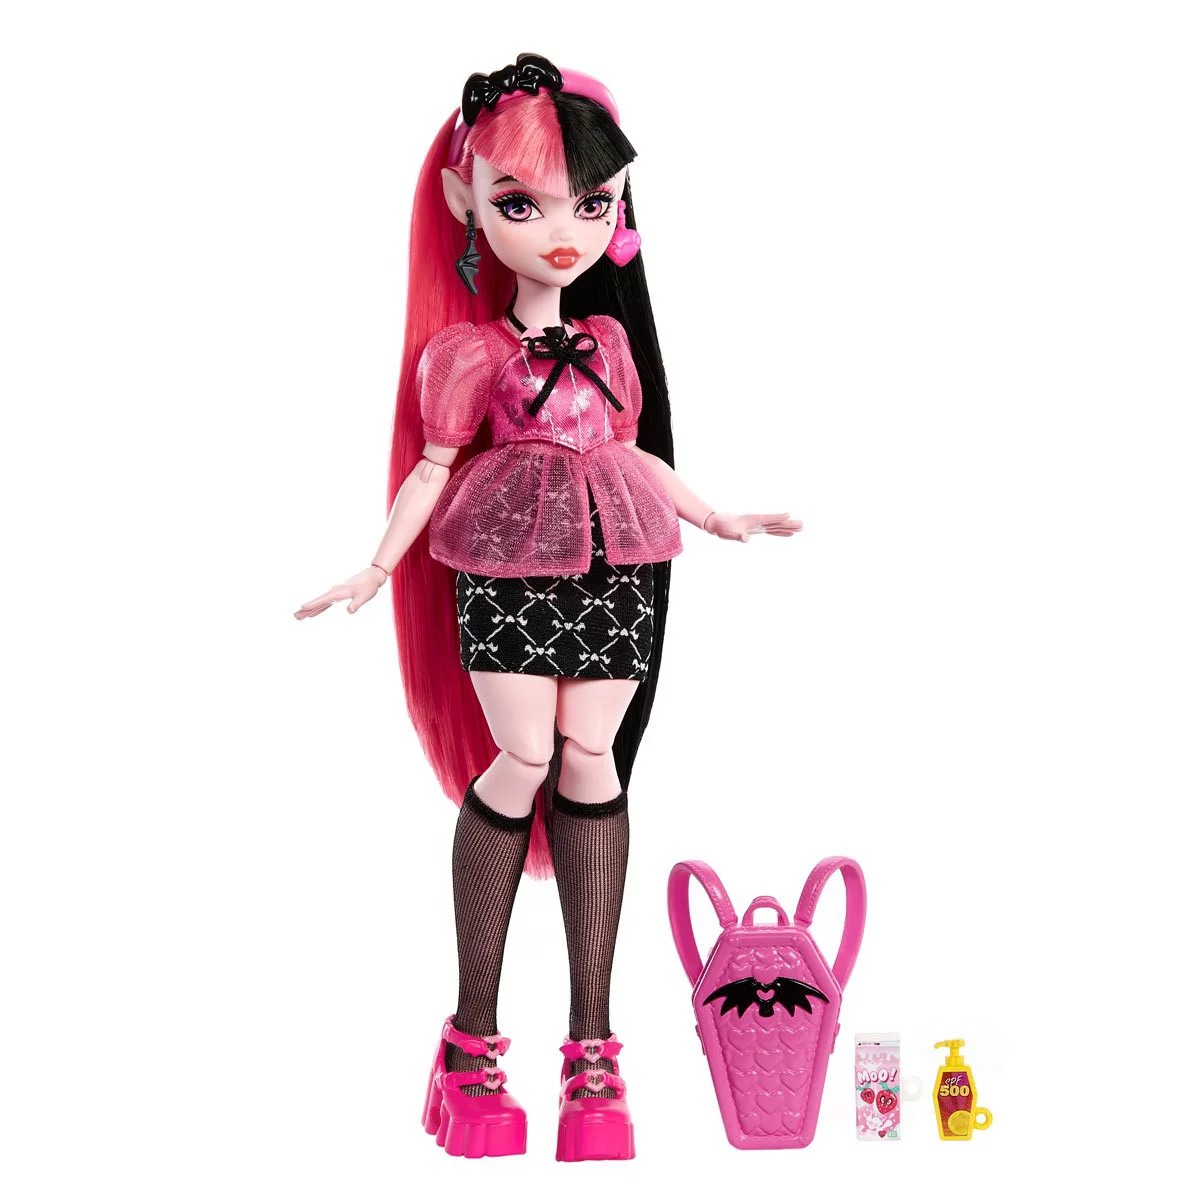 15-facts-about-draculaura-monster-high